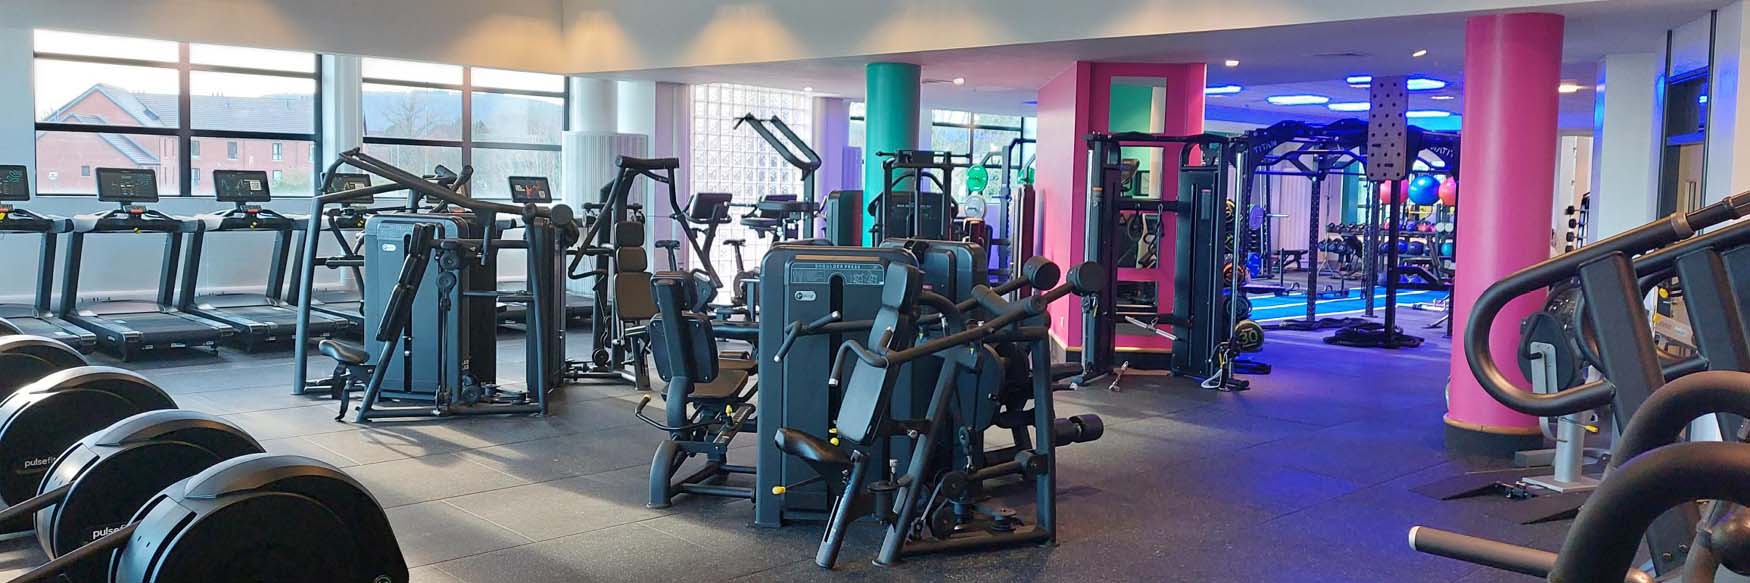 the new gym facilities at Larne Leisure Centre